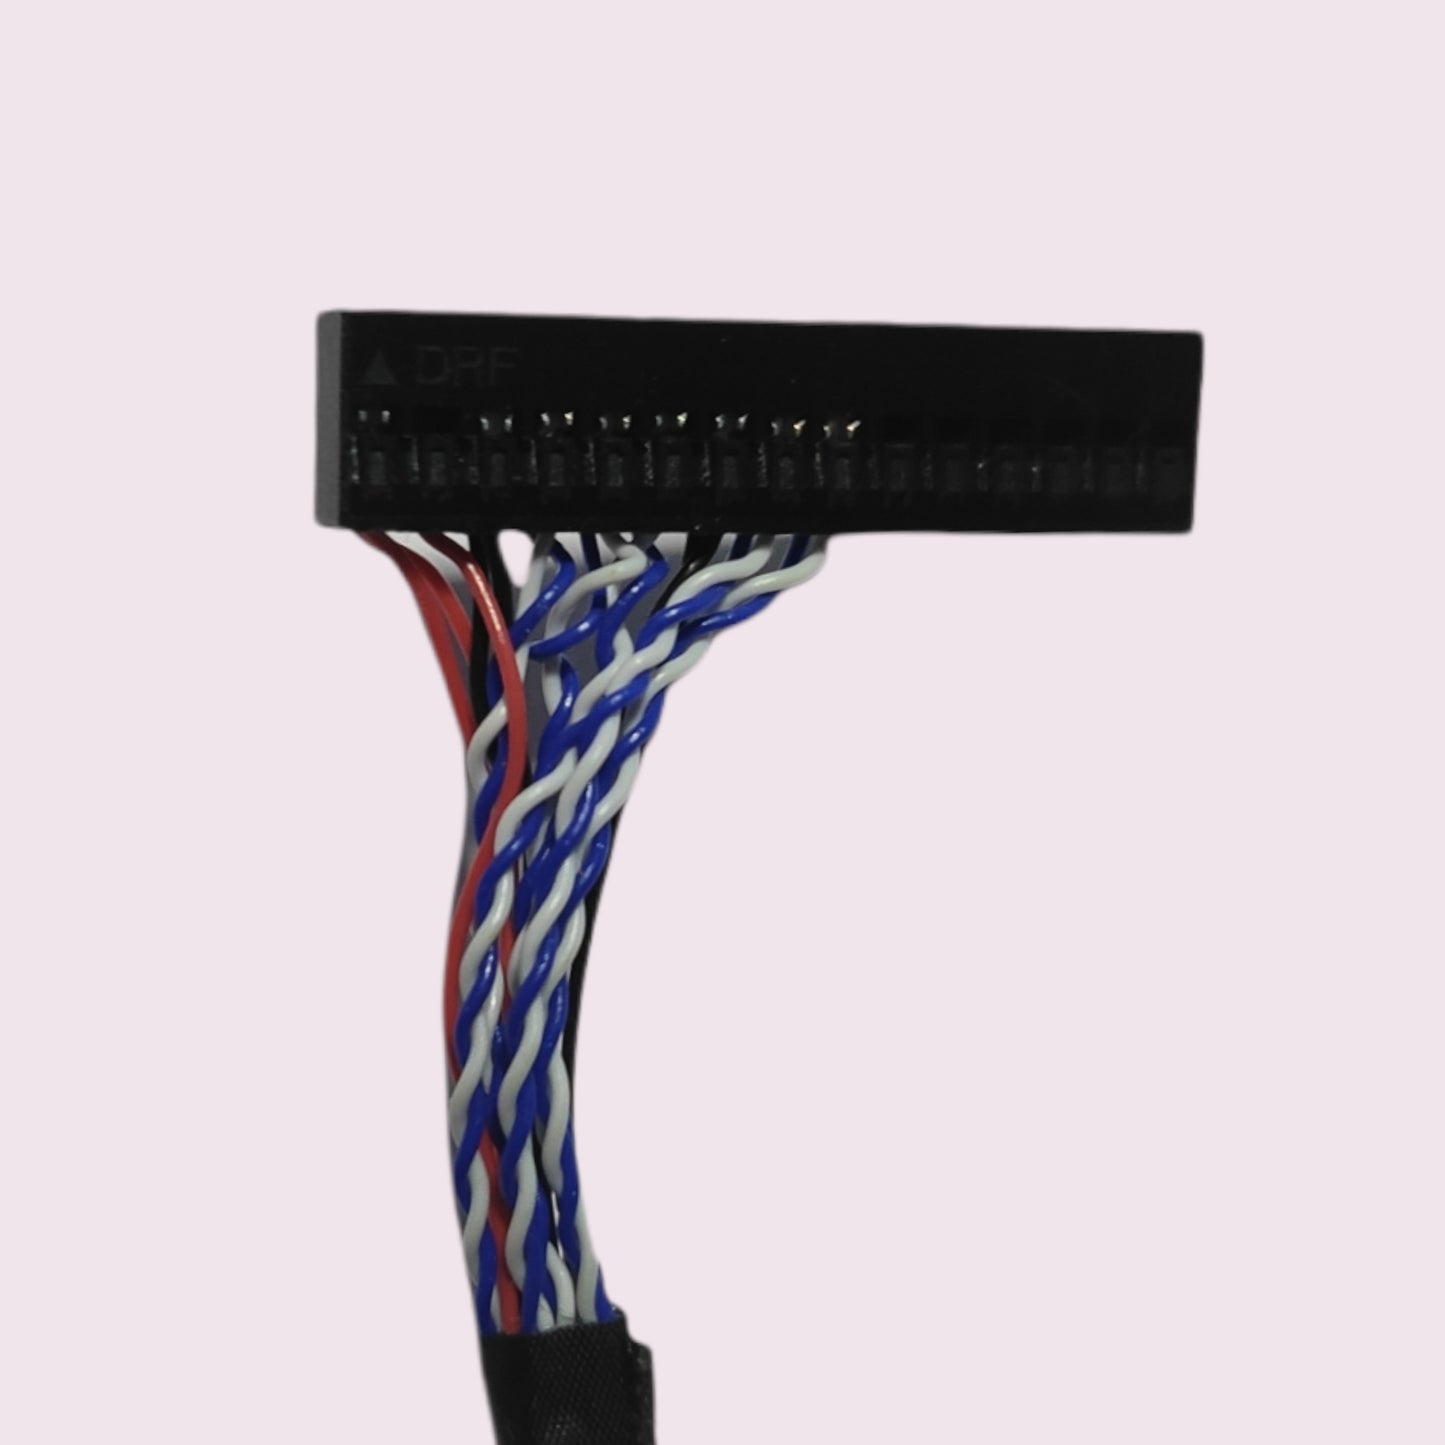 LVDS Cable 04 - Faritha